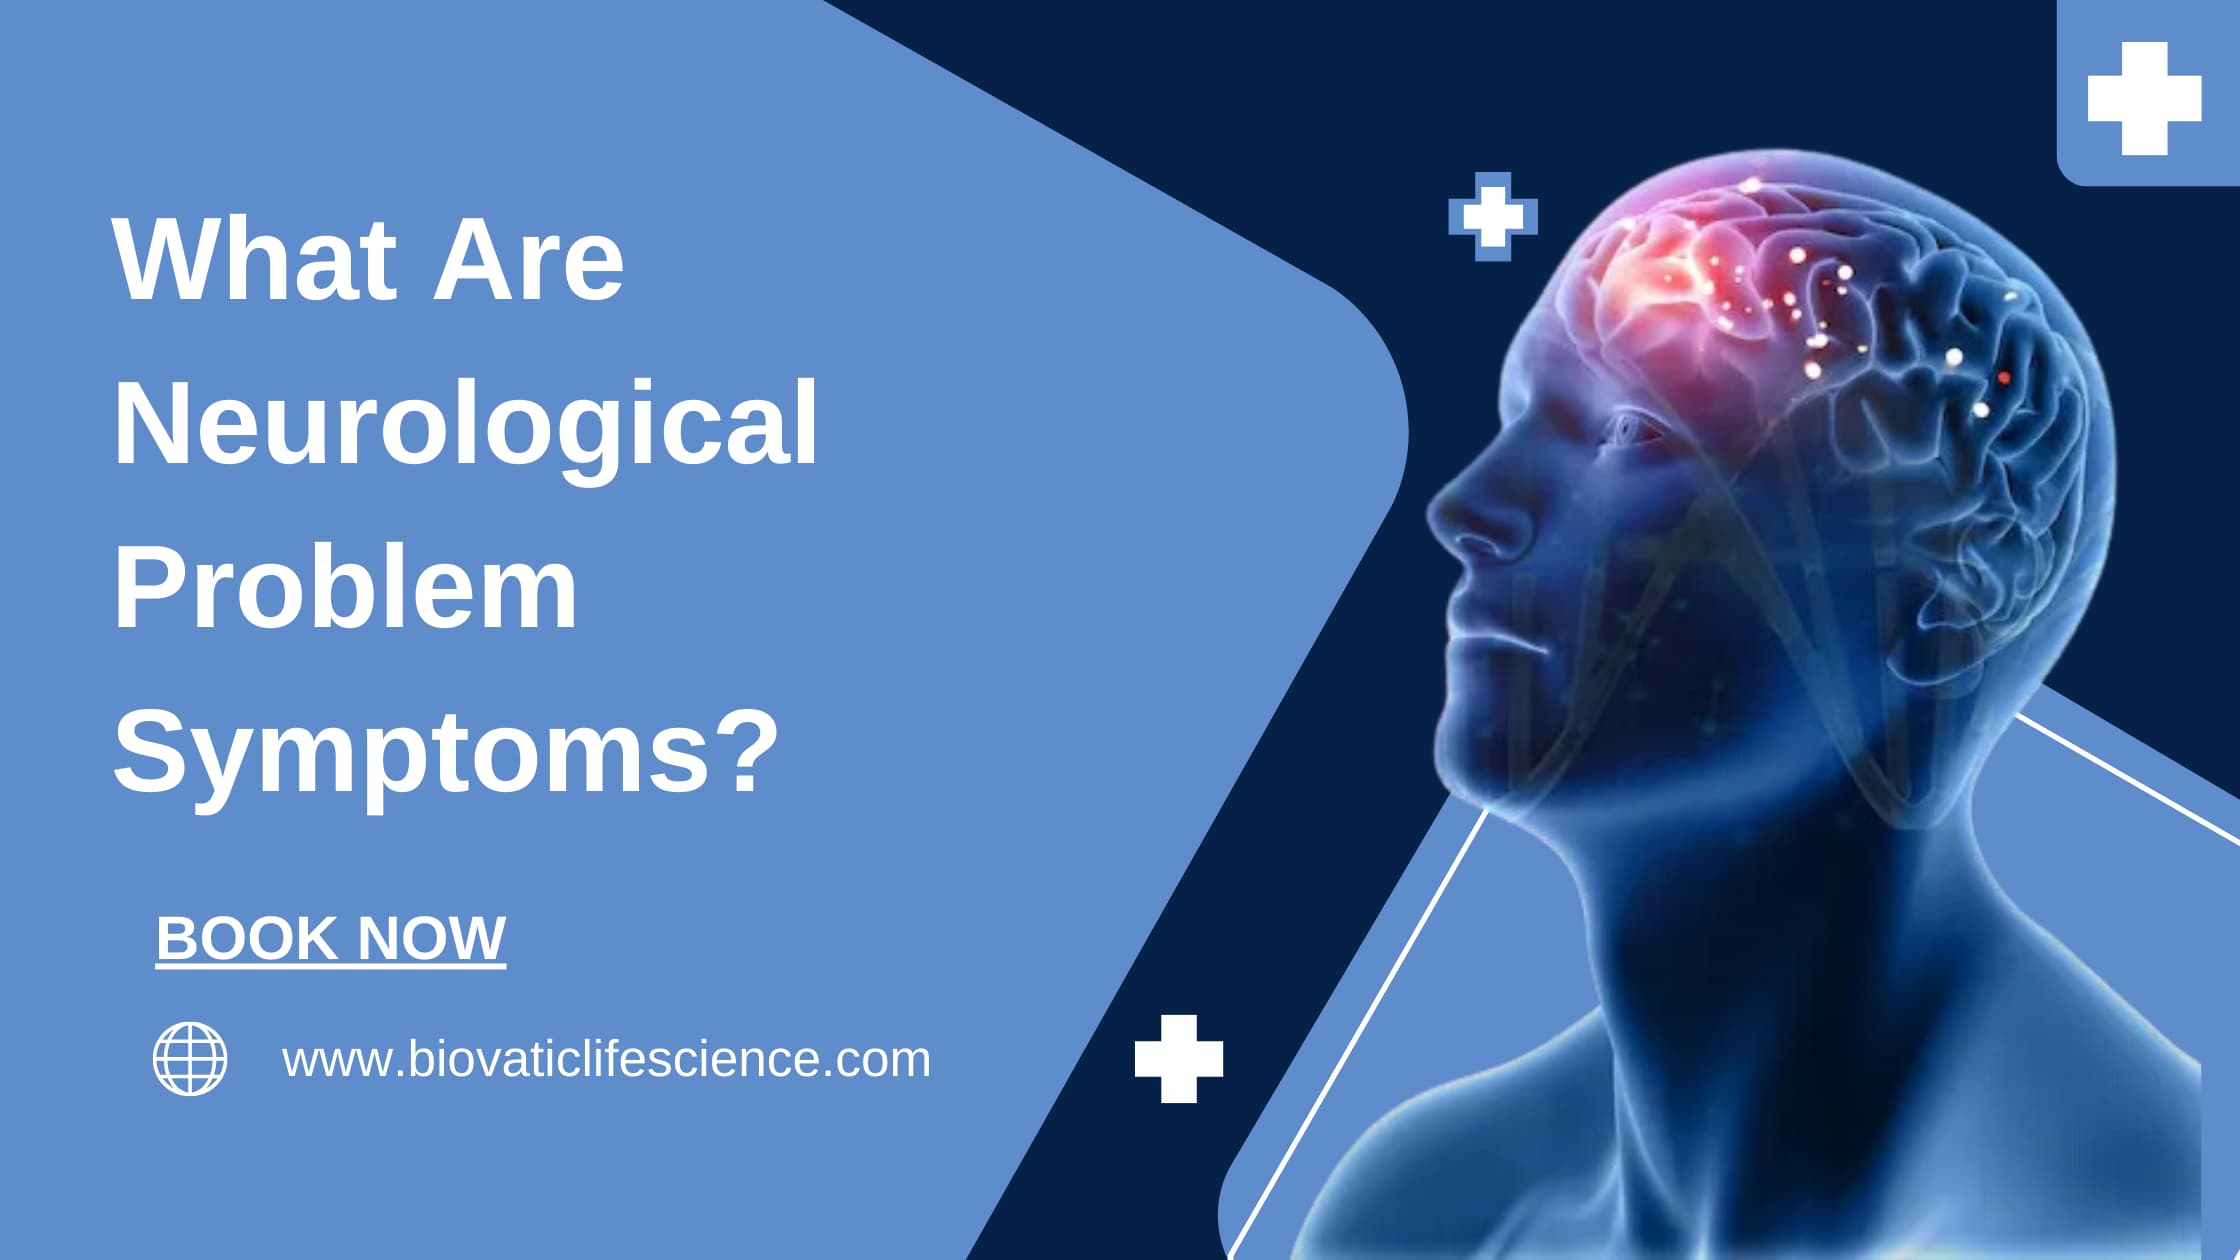 What Are Neurological Problem Symptoms?